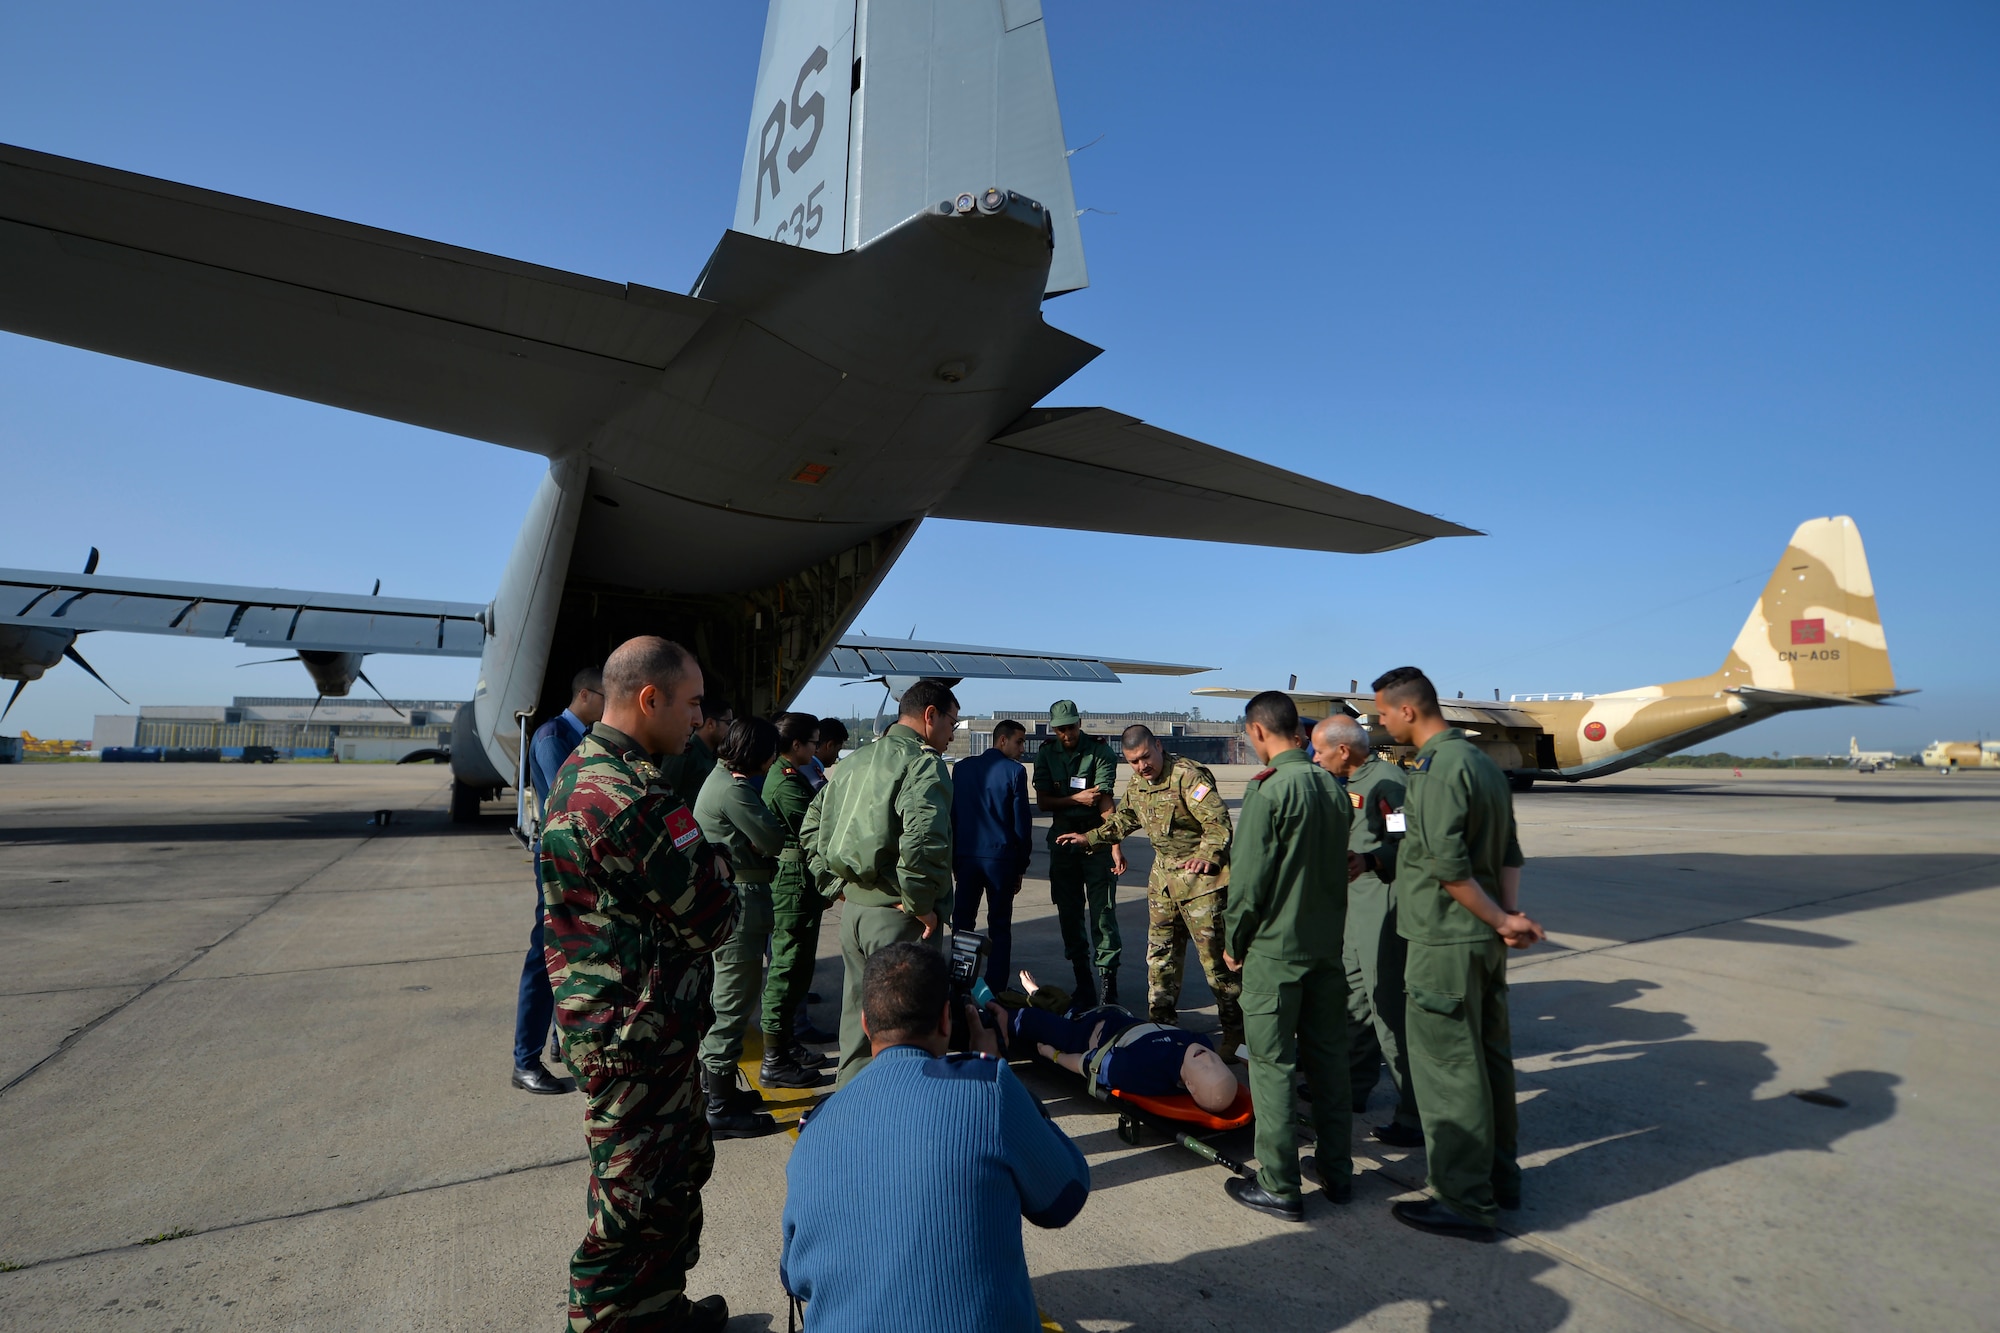 Captain Diego Torres, the 86th Aeromedical Evacuation Squadron flight nurse instructor, center, speaks to Moroccan Royal Armed Forces service members about AE procedures during Exercise African Lion 2018, April 19, 2018, at Kenitra Air Base, Morocco. Airmen from the 86th Aeromedical Evacuation Squadron shared AE procedures with Moroccan Royal Armed Forces service members to promote interoperability of forces. (U.S. Air Force photo by Staff Sgt. Nesha Humes Stanton/Released)